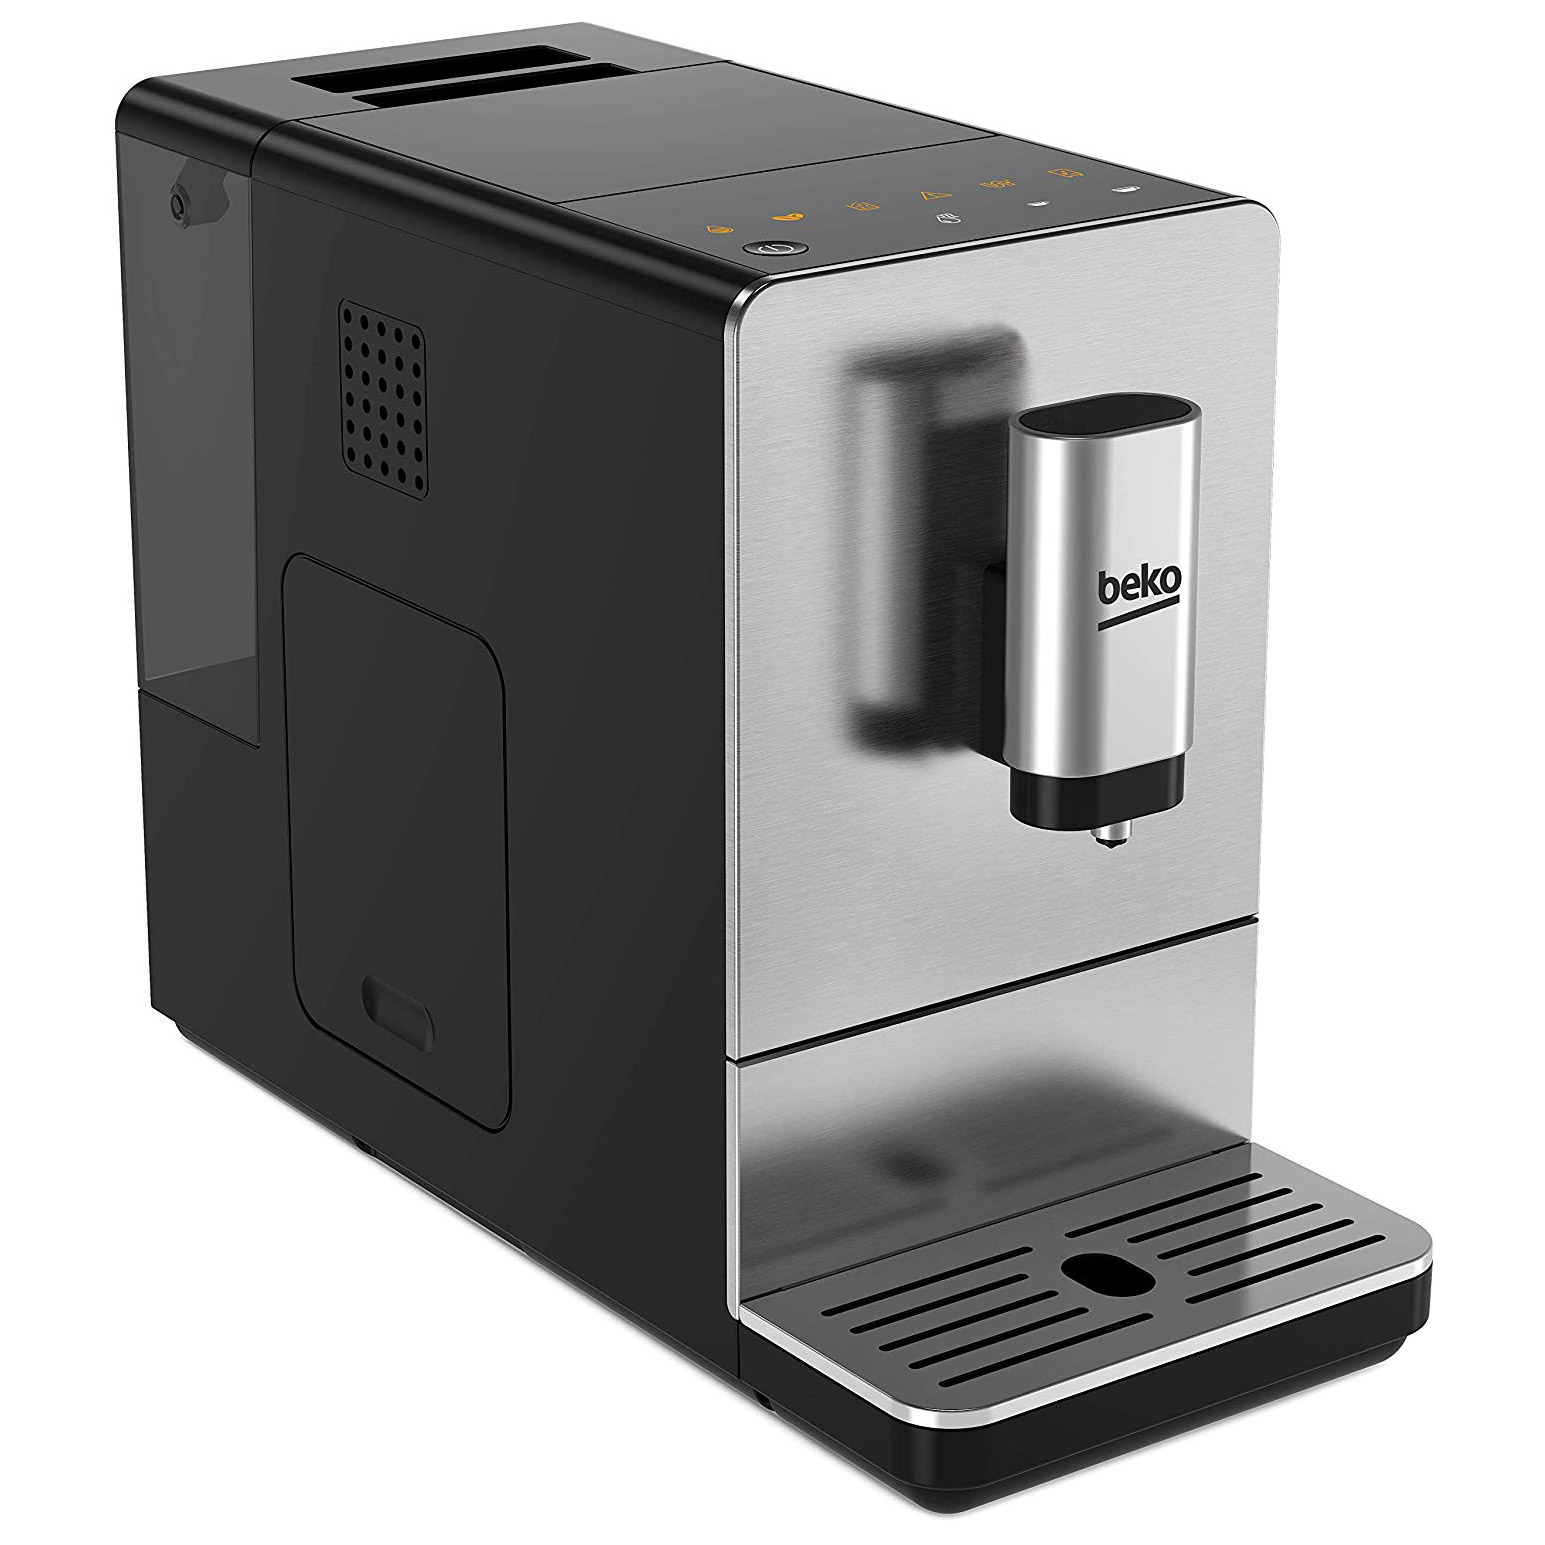 Image of Beko CEG5301X Bean to Cup Coffee Machine Stainess Steel